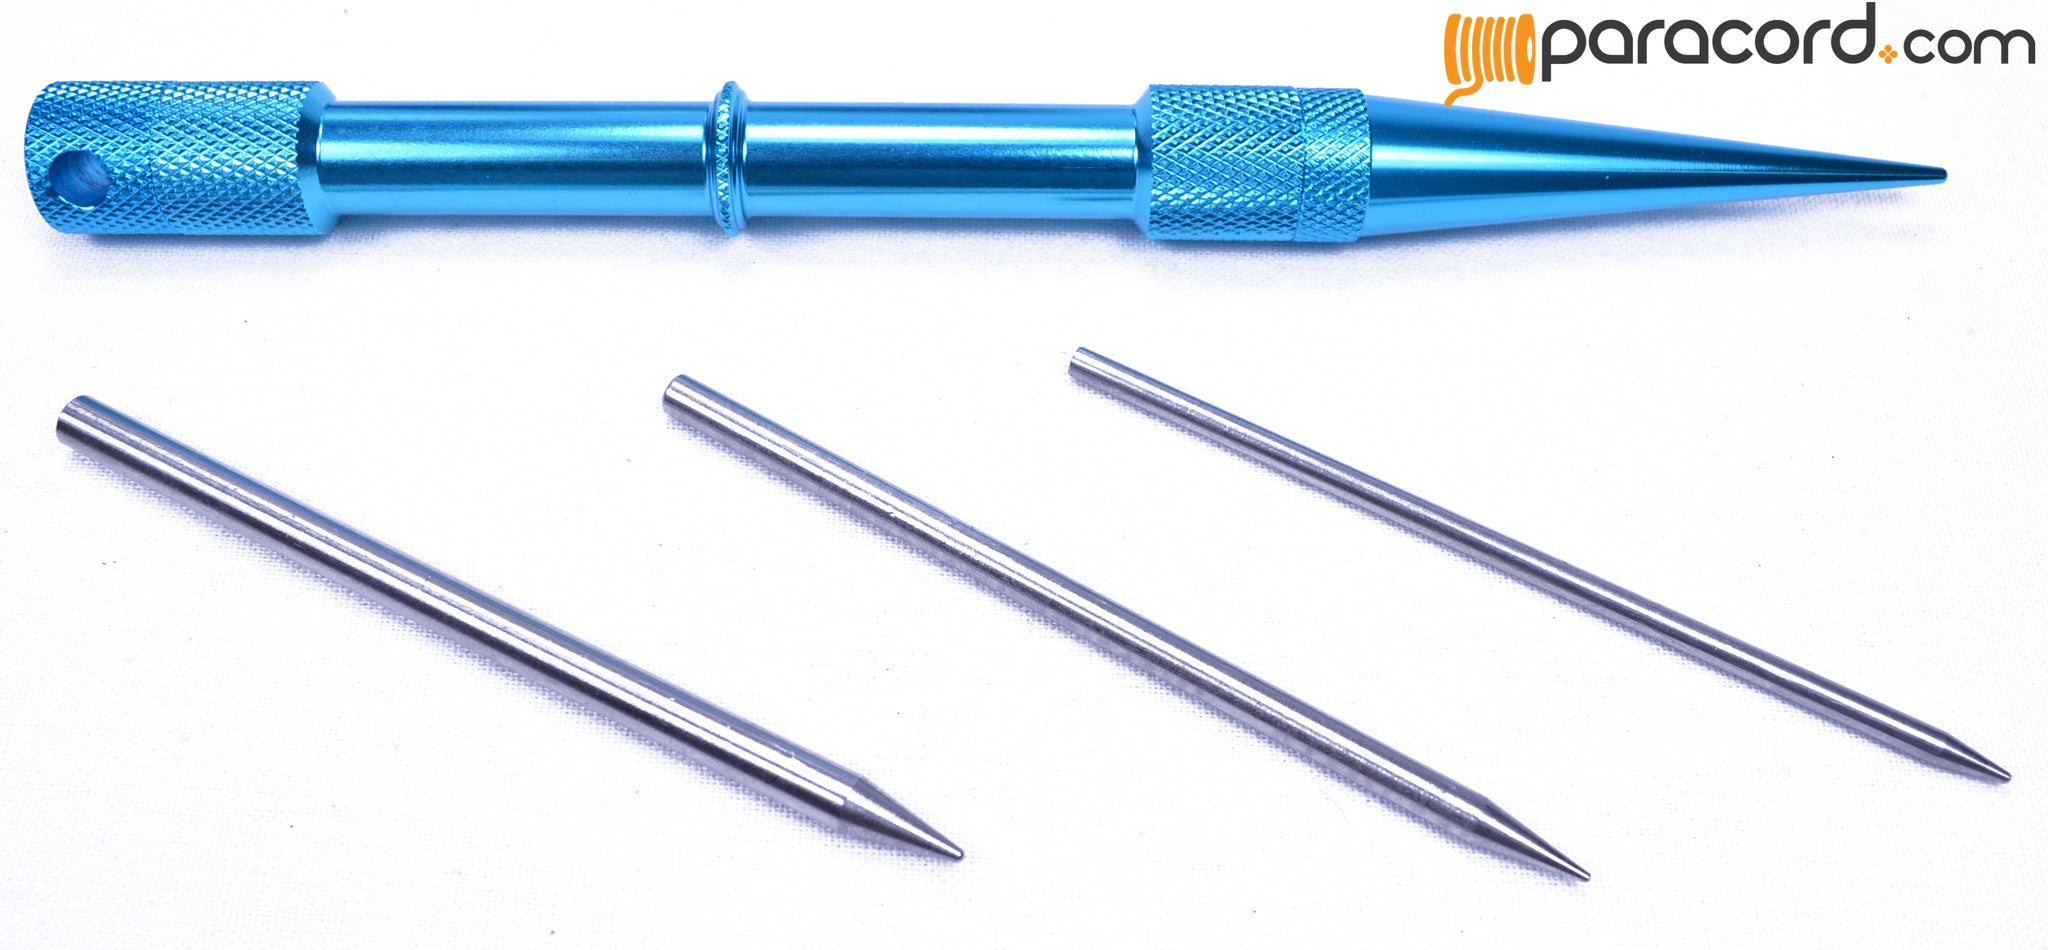 Blue Tightening Tool / Marlin Spike for Paracord or Leather Work -   Canada